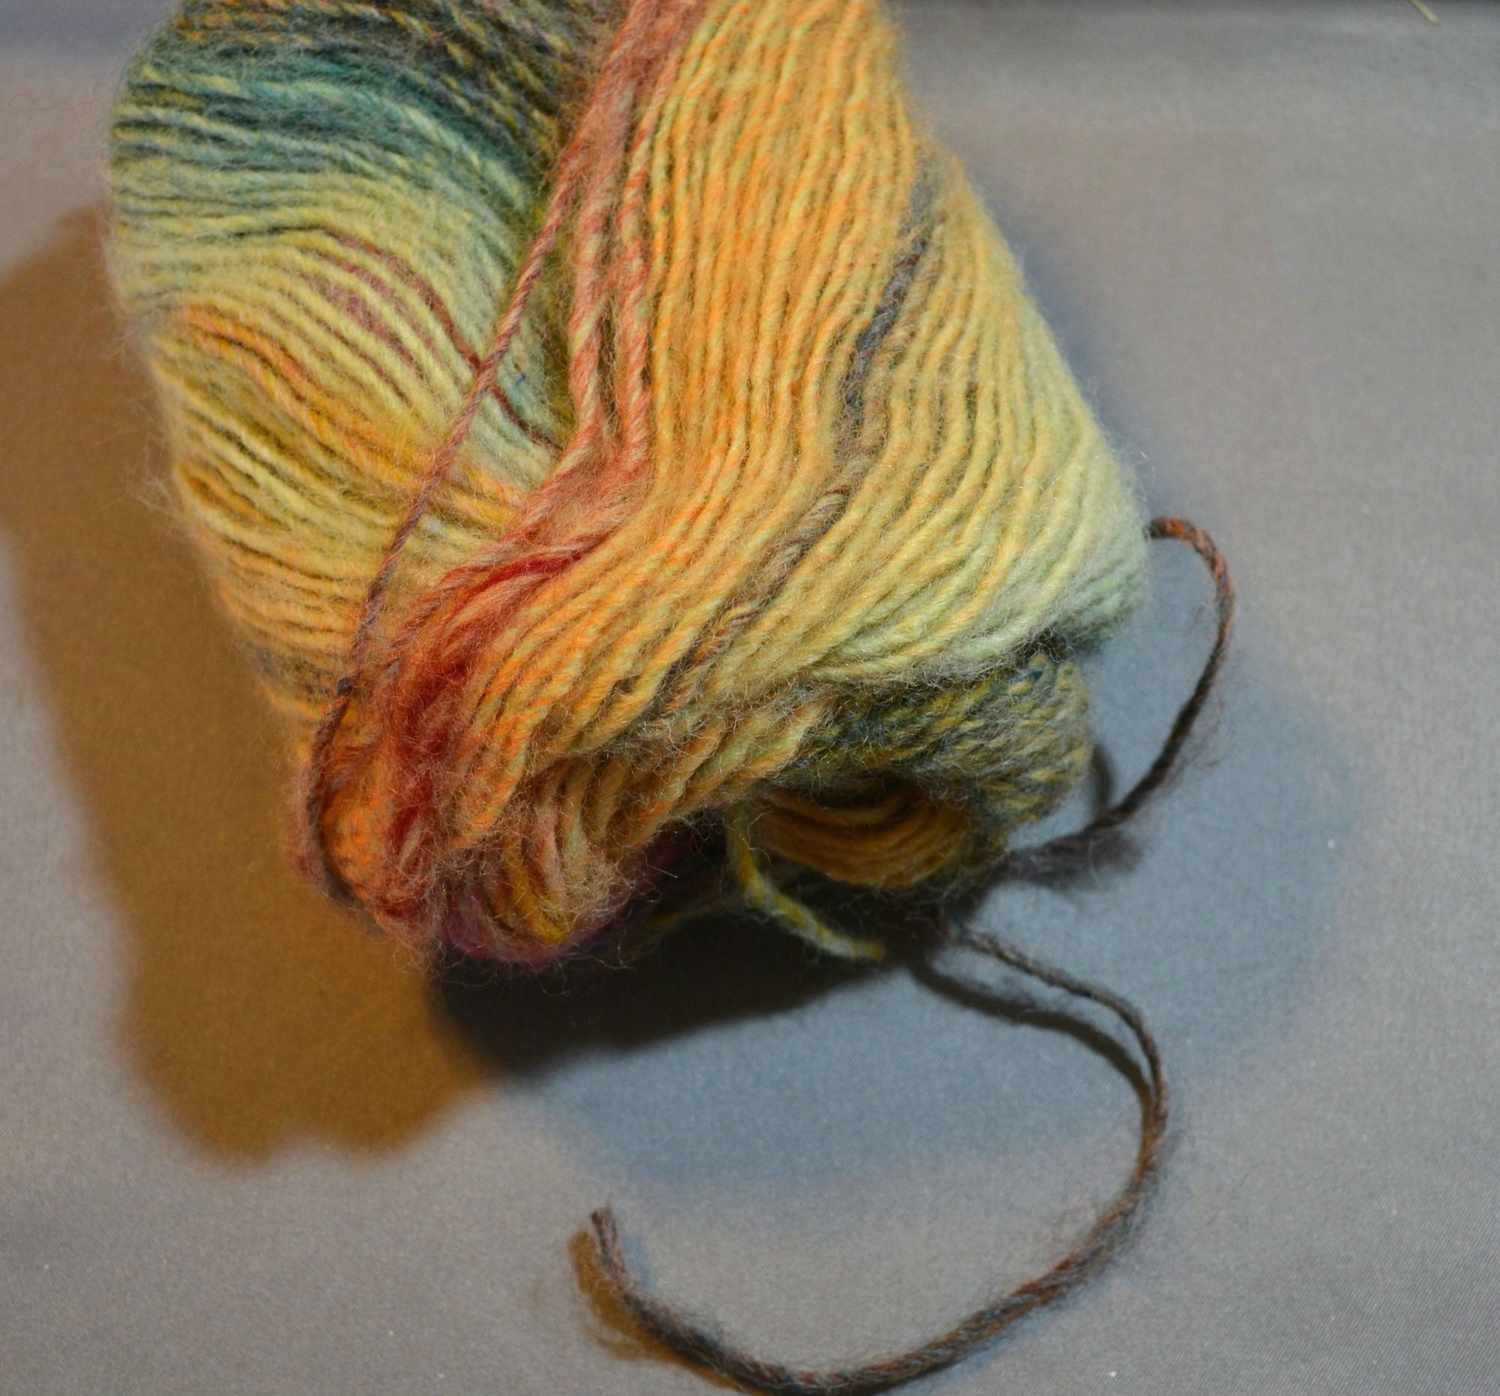 A singles yarn is made from one "ply" of yarn.